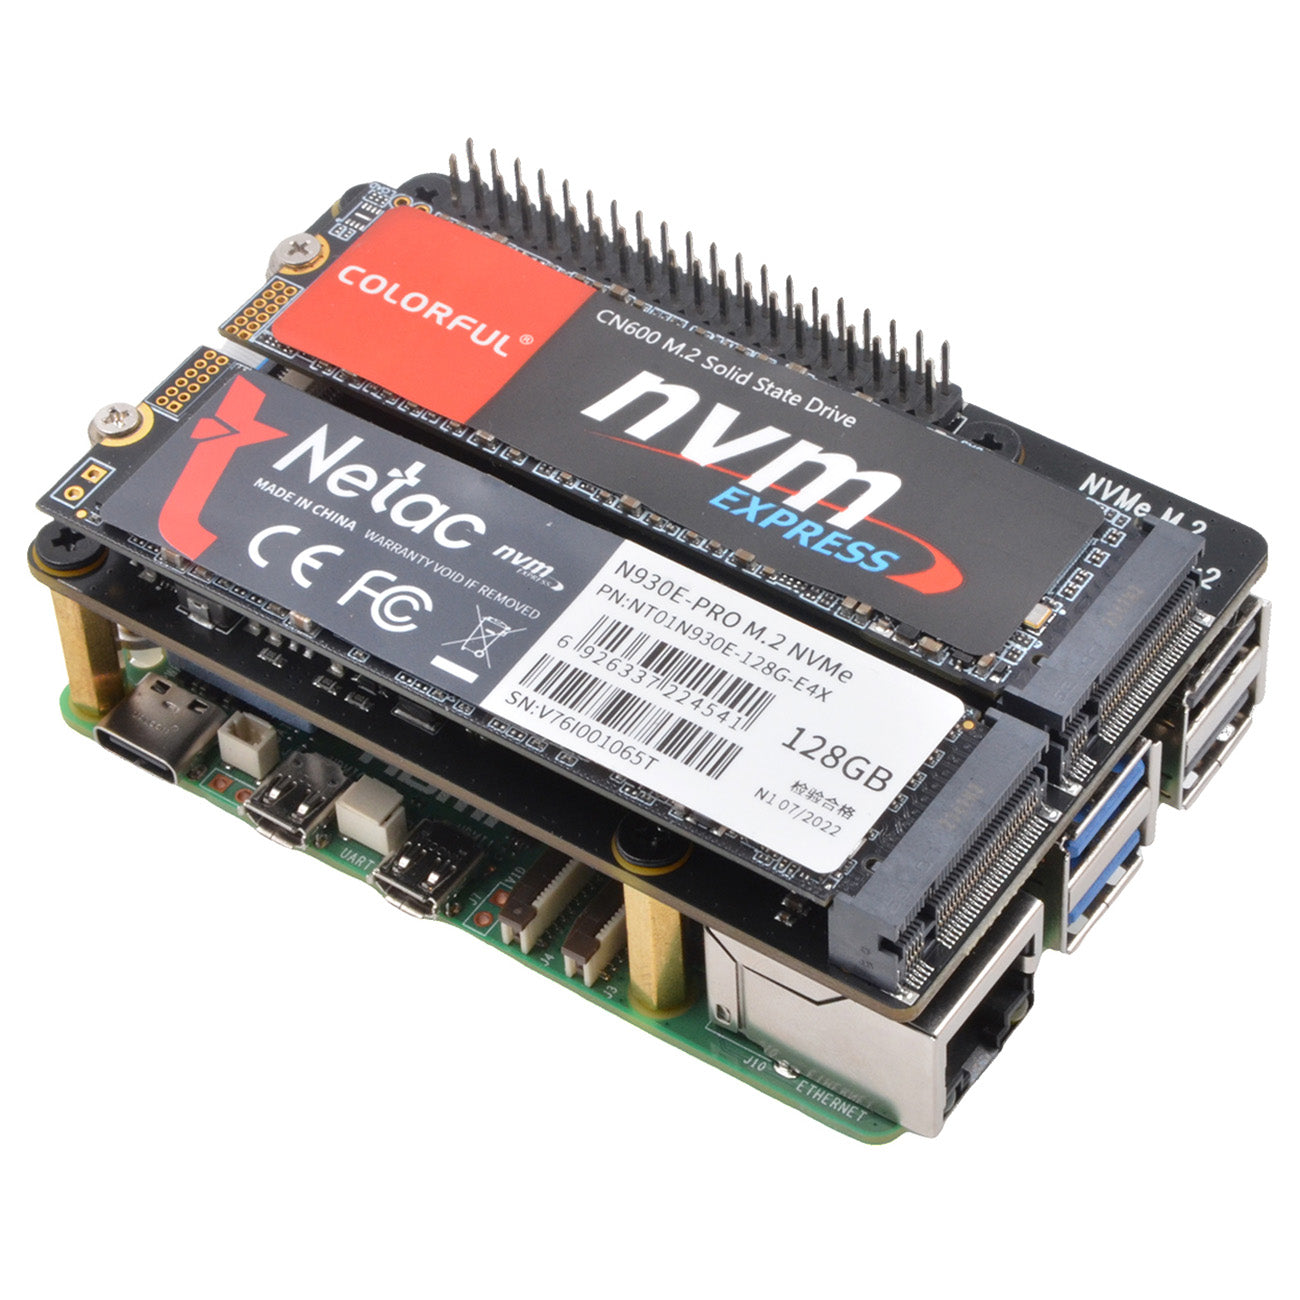 Geekworm X1003 PCIe to NVMe SSD adapter for Raspberry Pi 5 works